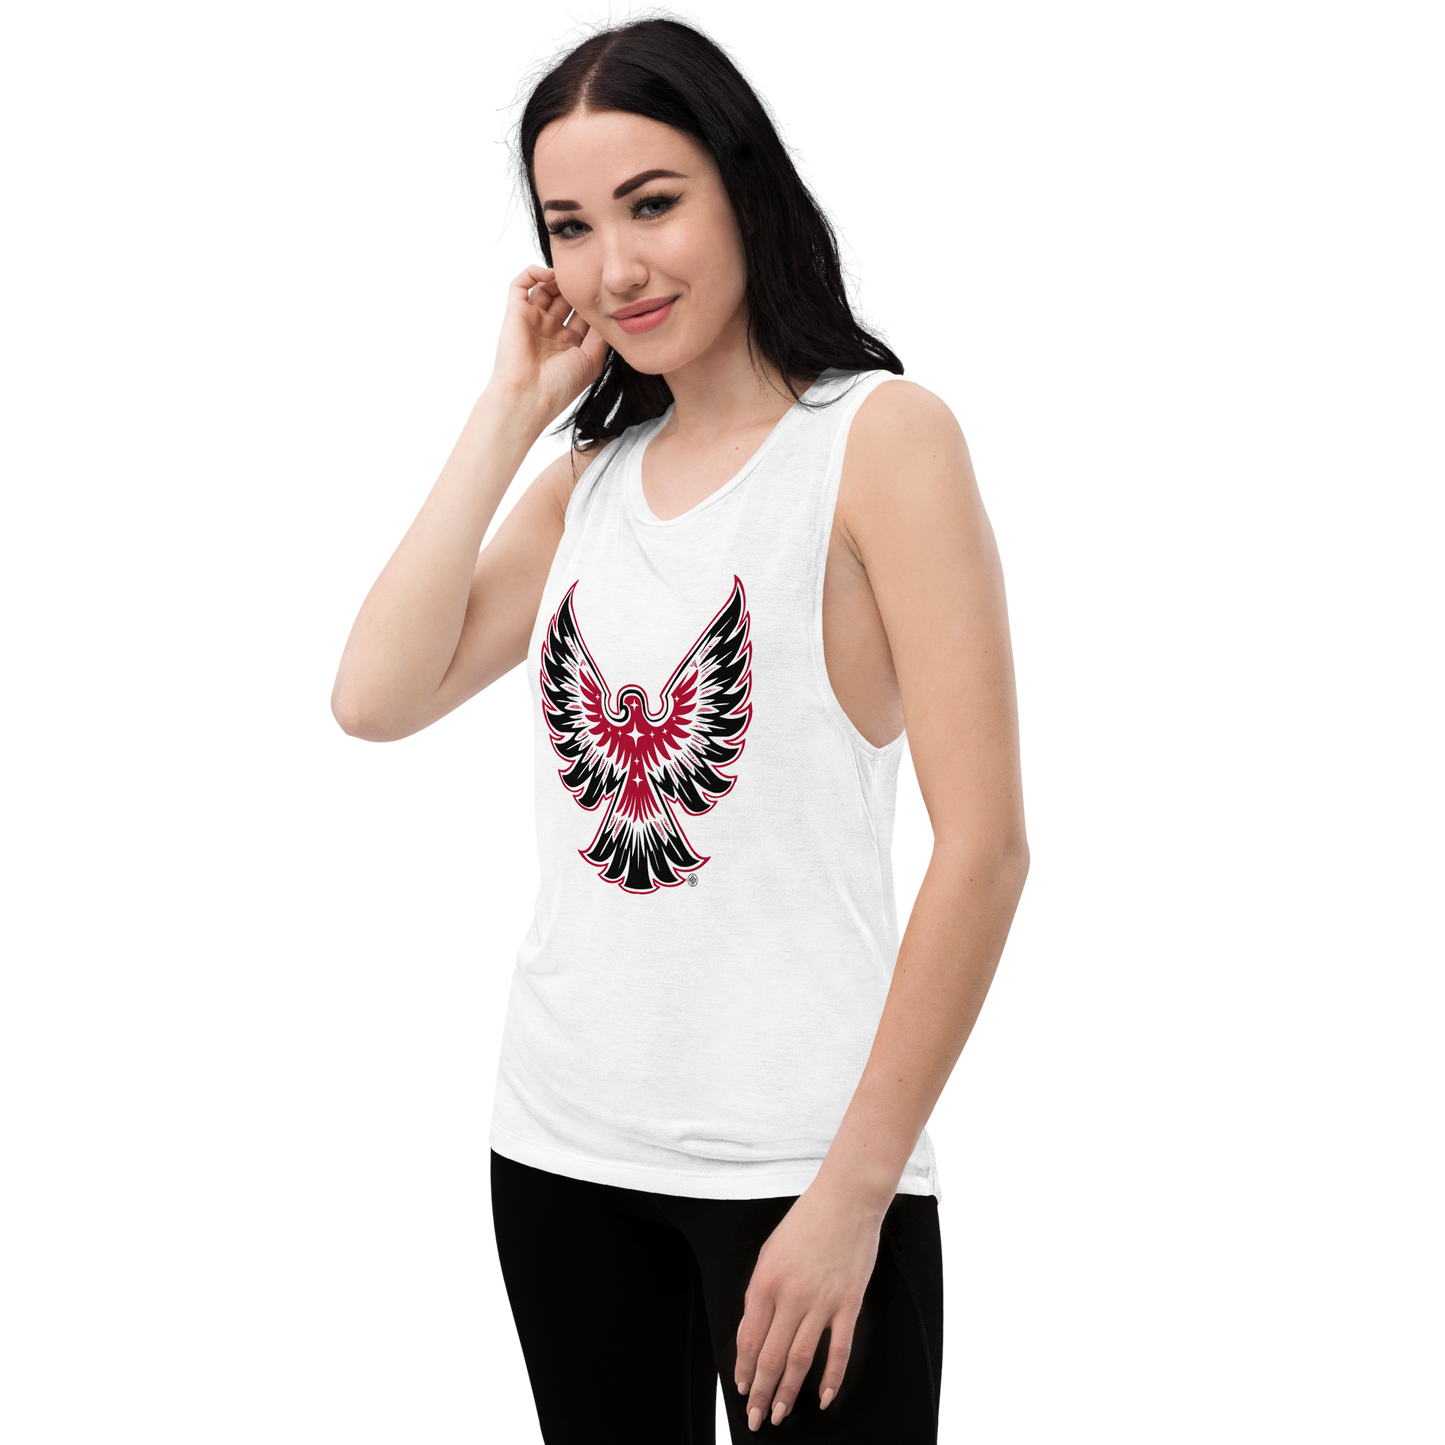 Women's Sleeveless T-Shirt ❯ Spread Your Wings ❯ Various Colors